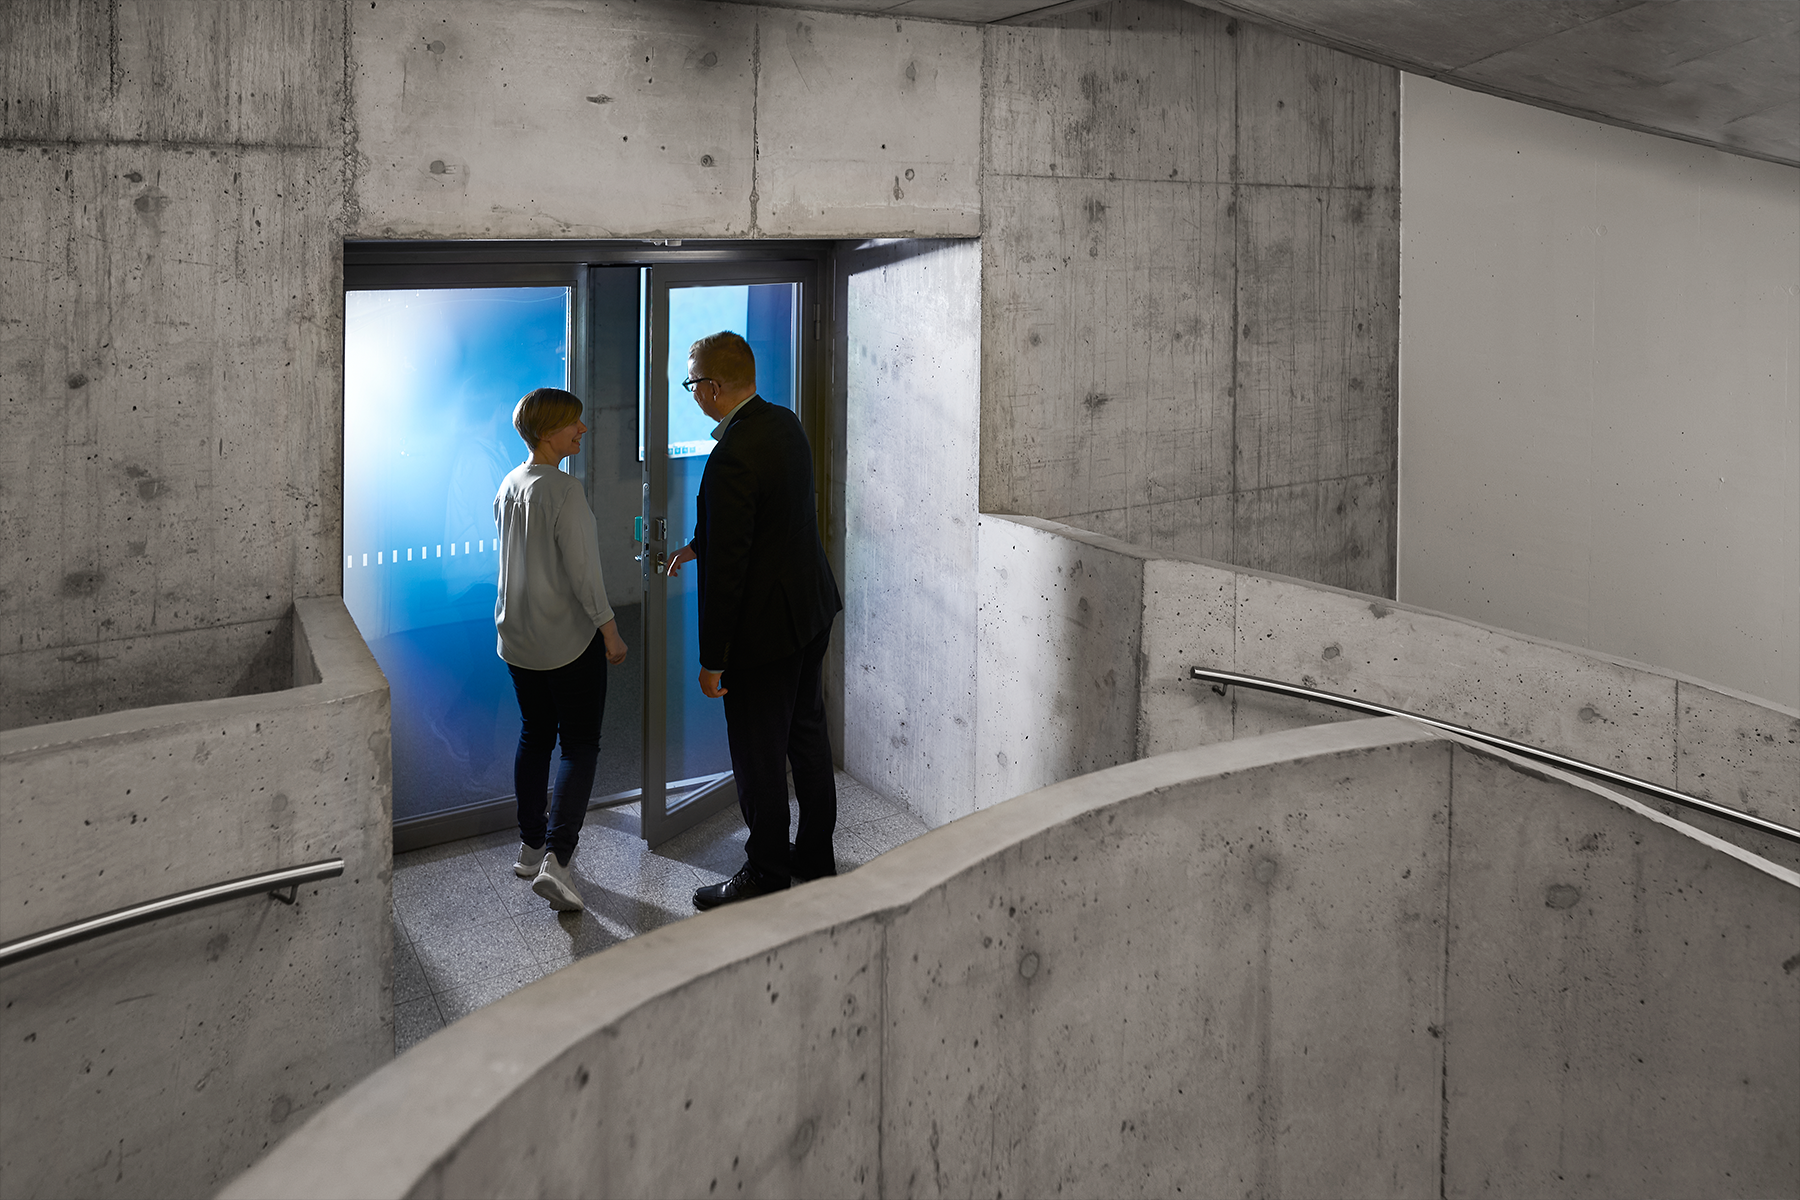  Illustration - two people at a door in a grey concrete stairway.